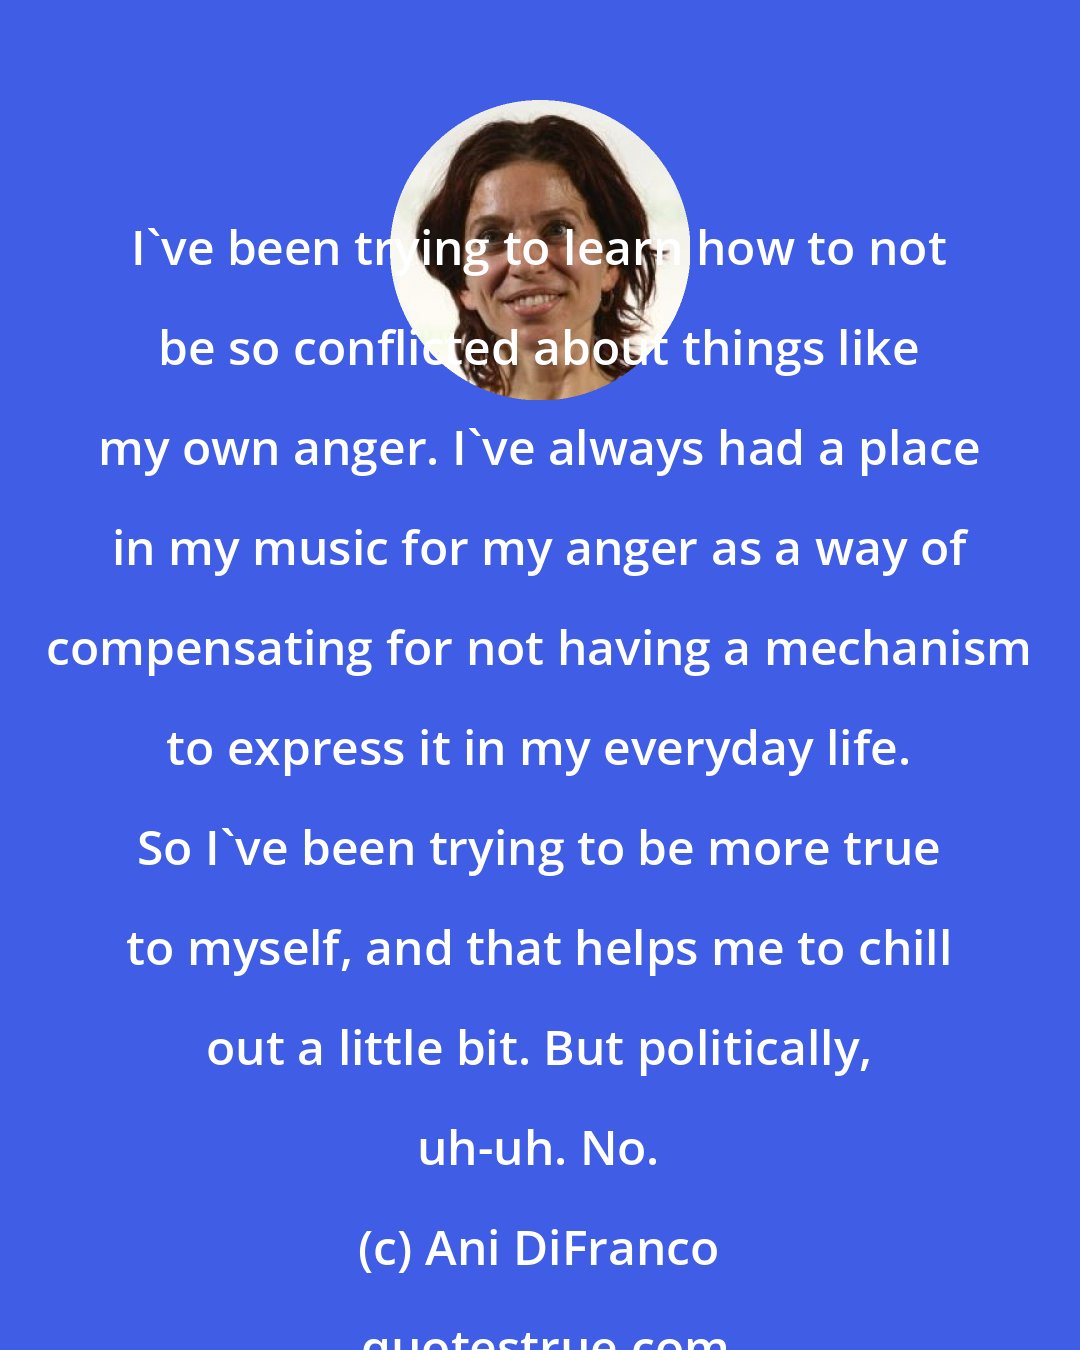 Ani DiFranco: I've been trying to learn how to not be so conflicted about things like my own anger. I've always had a place in my music for my anger as a way of compensating for not having a mechanism to express it in my everyday life. So I've been trying to be more true to myself, and that helps me to chill out a little bit. But politically, uh-uh. No.